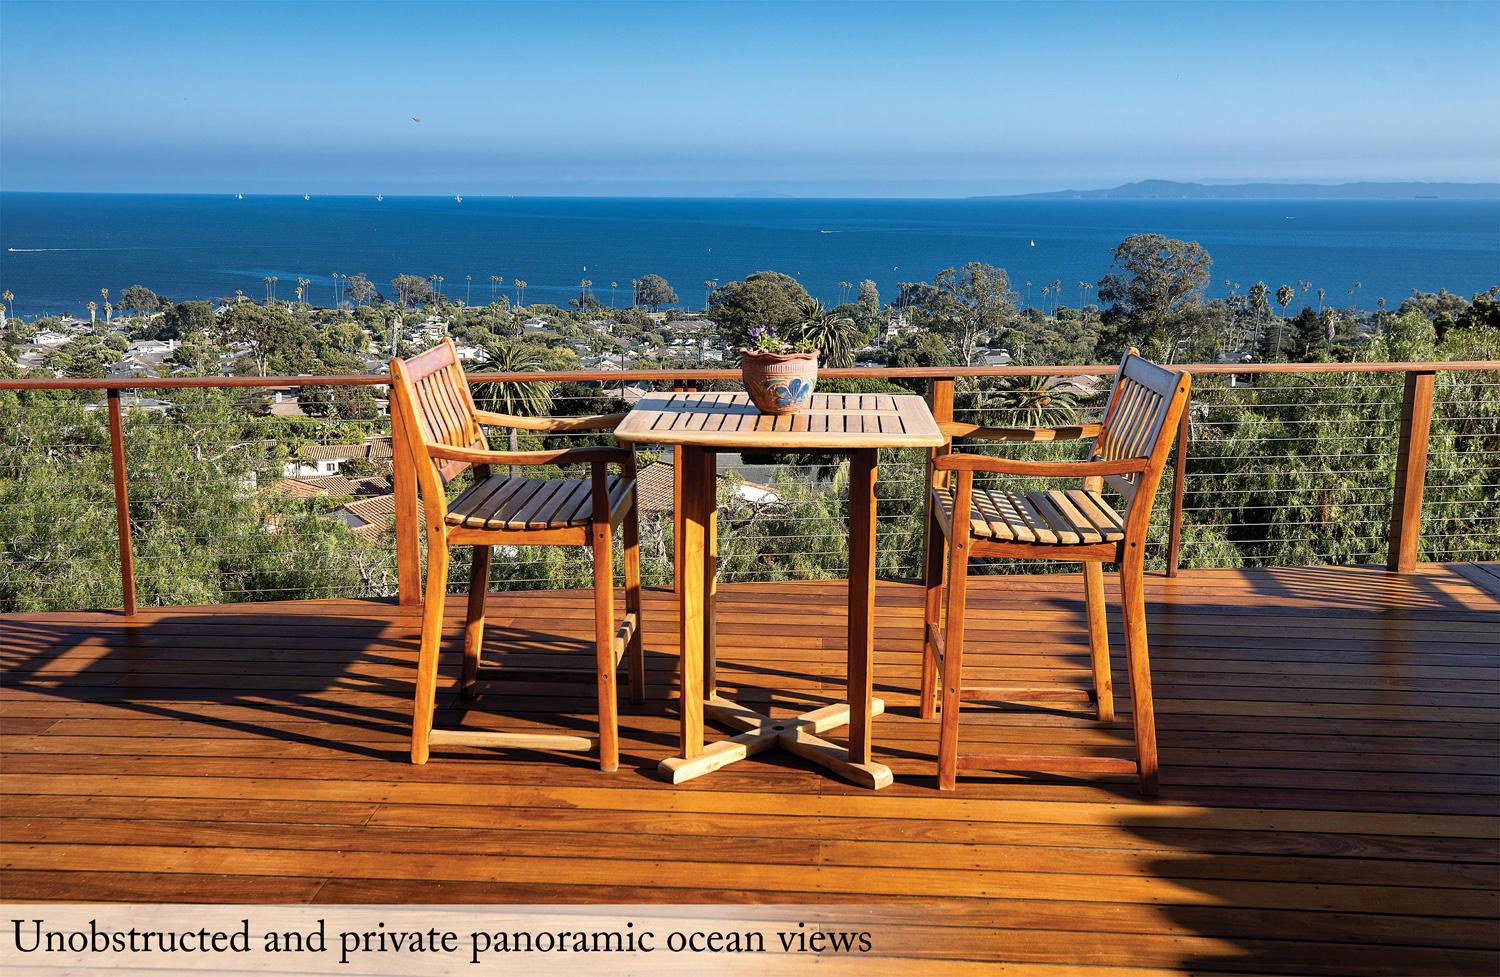 Unobstructed and private panoramic ocean